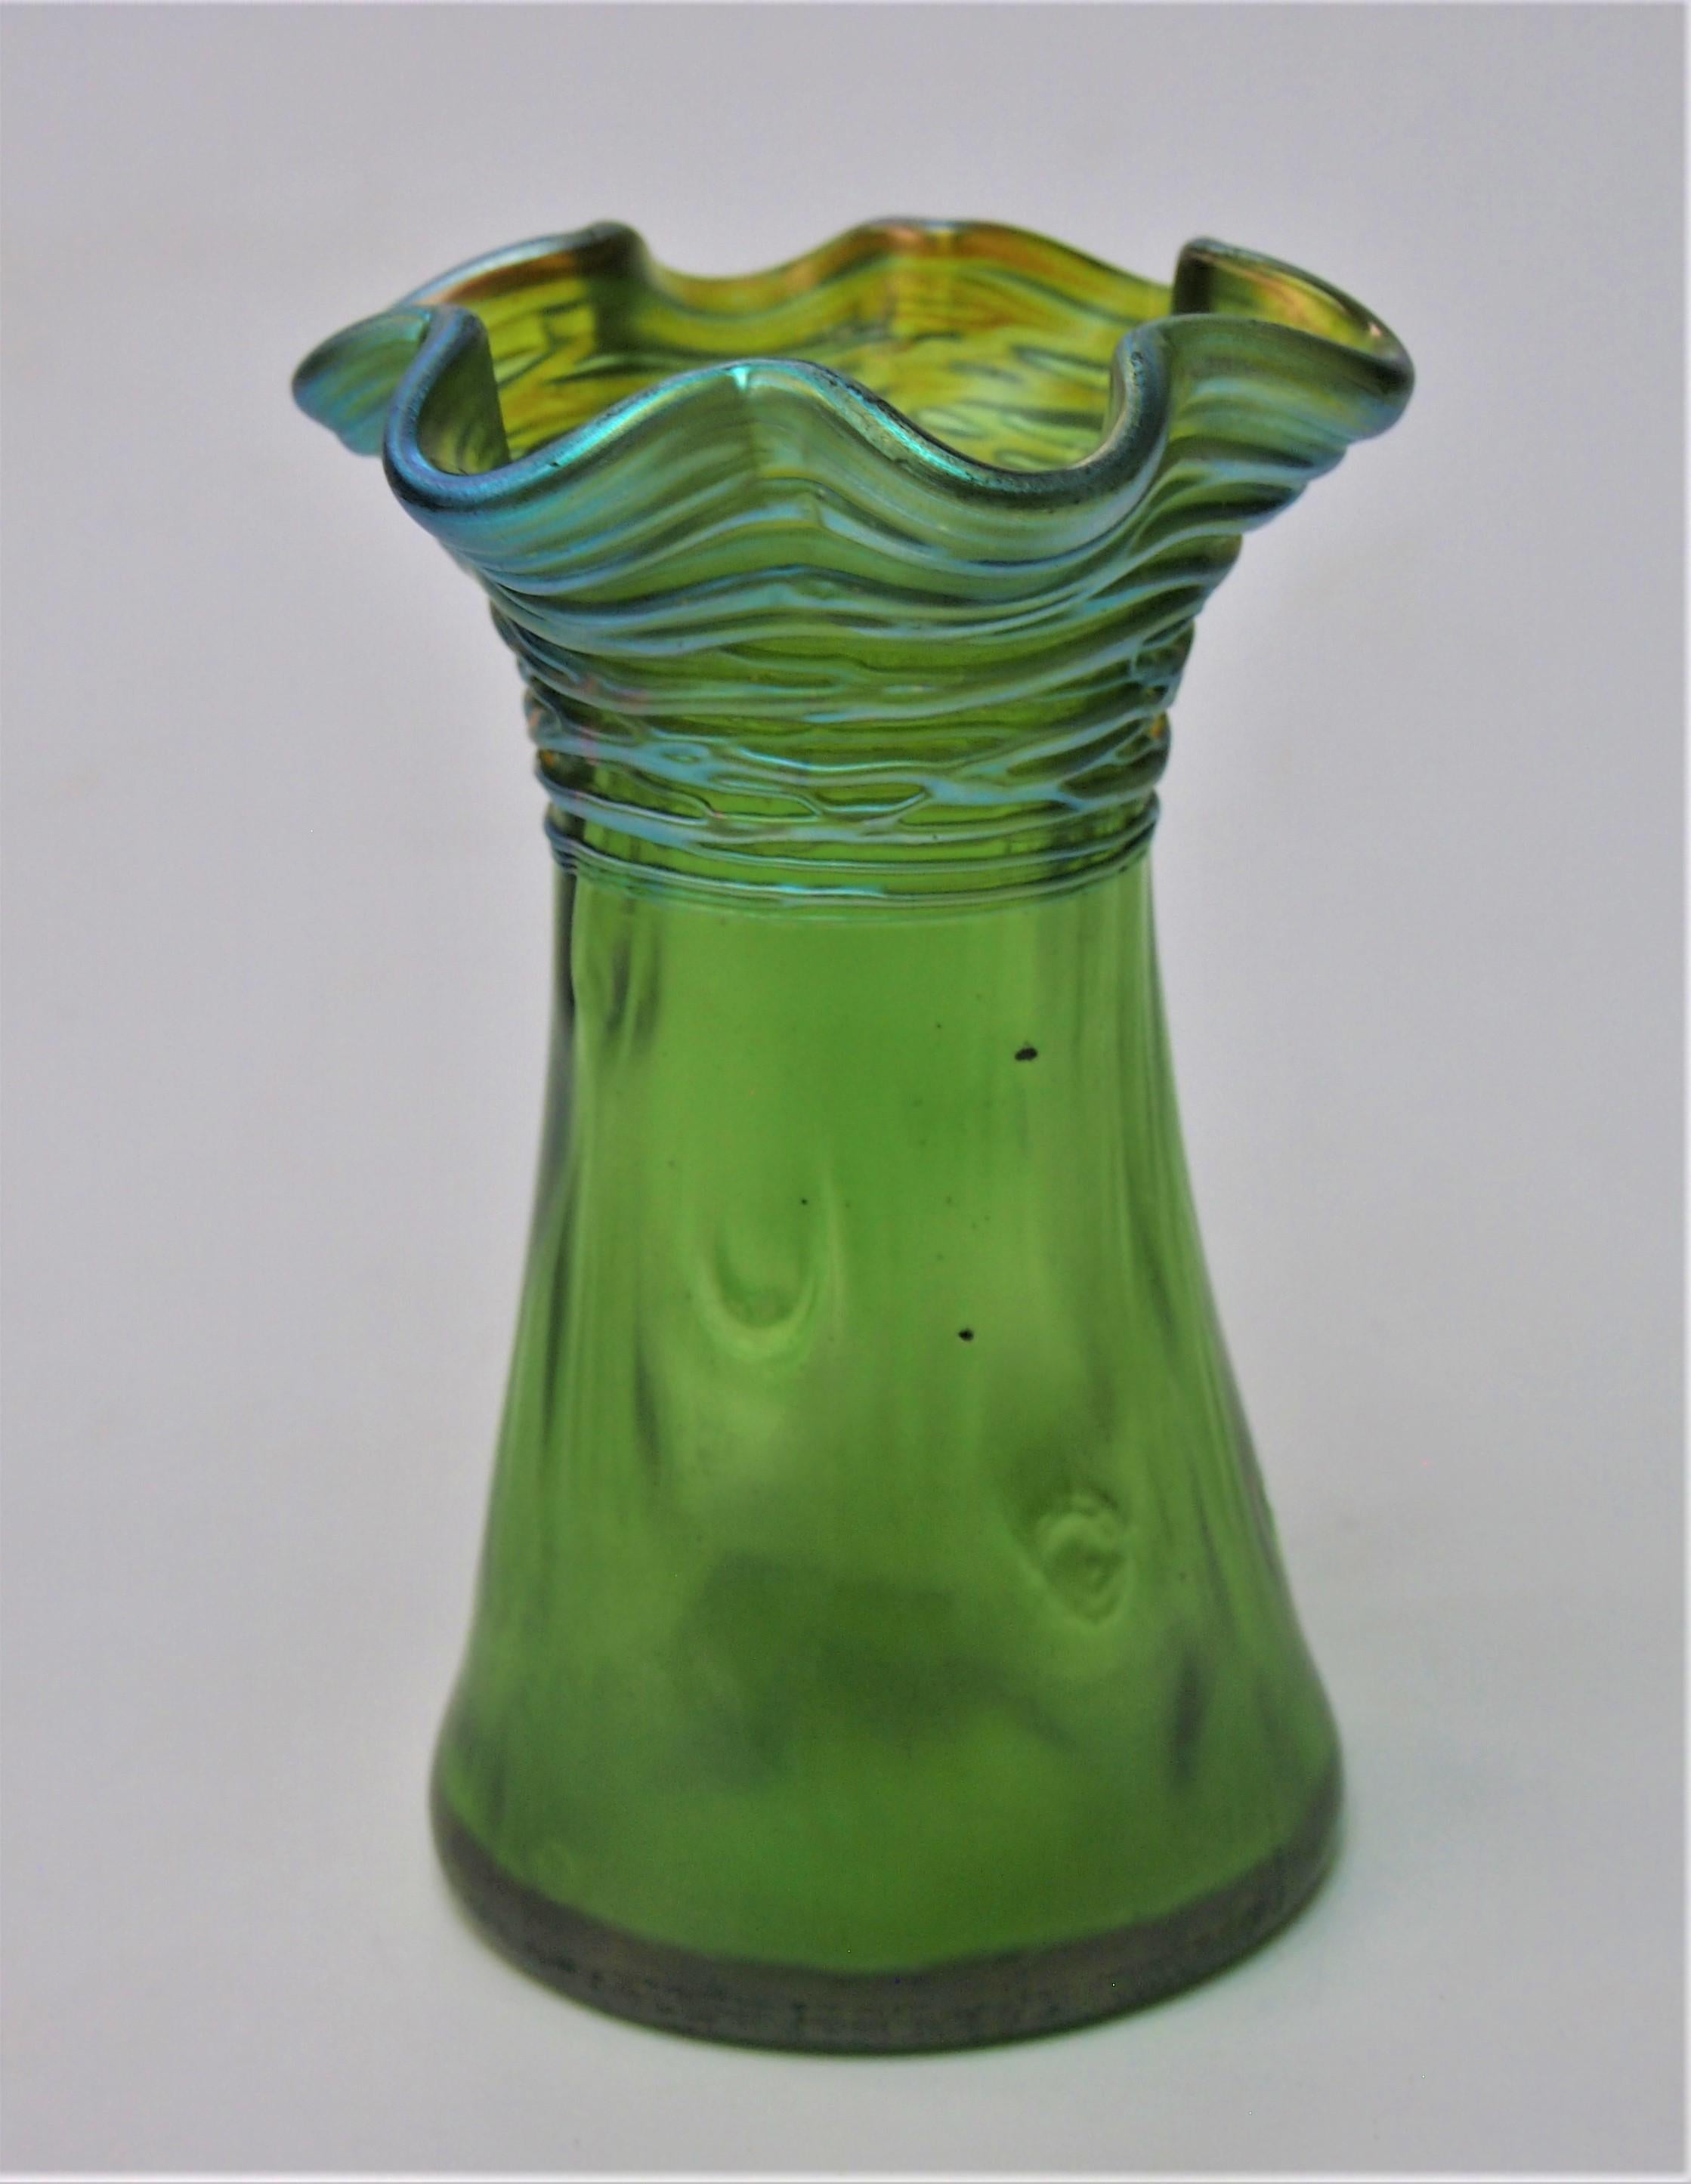 Czech Rare and unusual Bohemian Loetz Crete Rusticana with Threads glass vase c 1899 For Sale